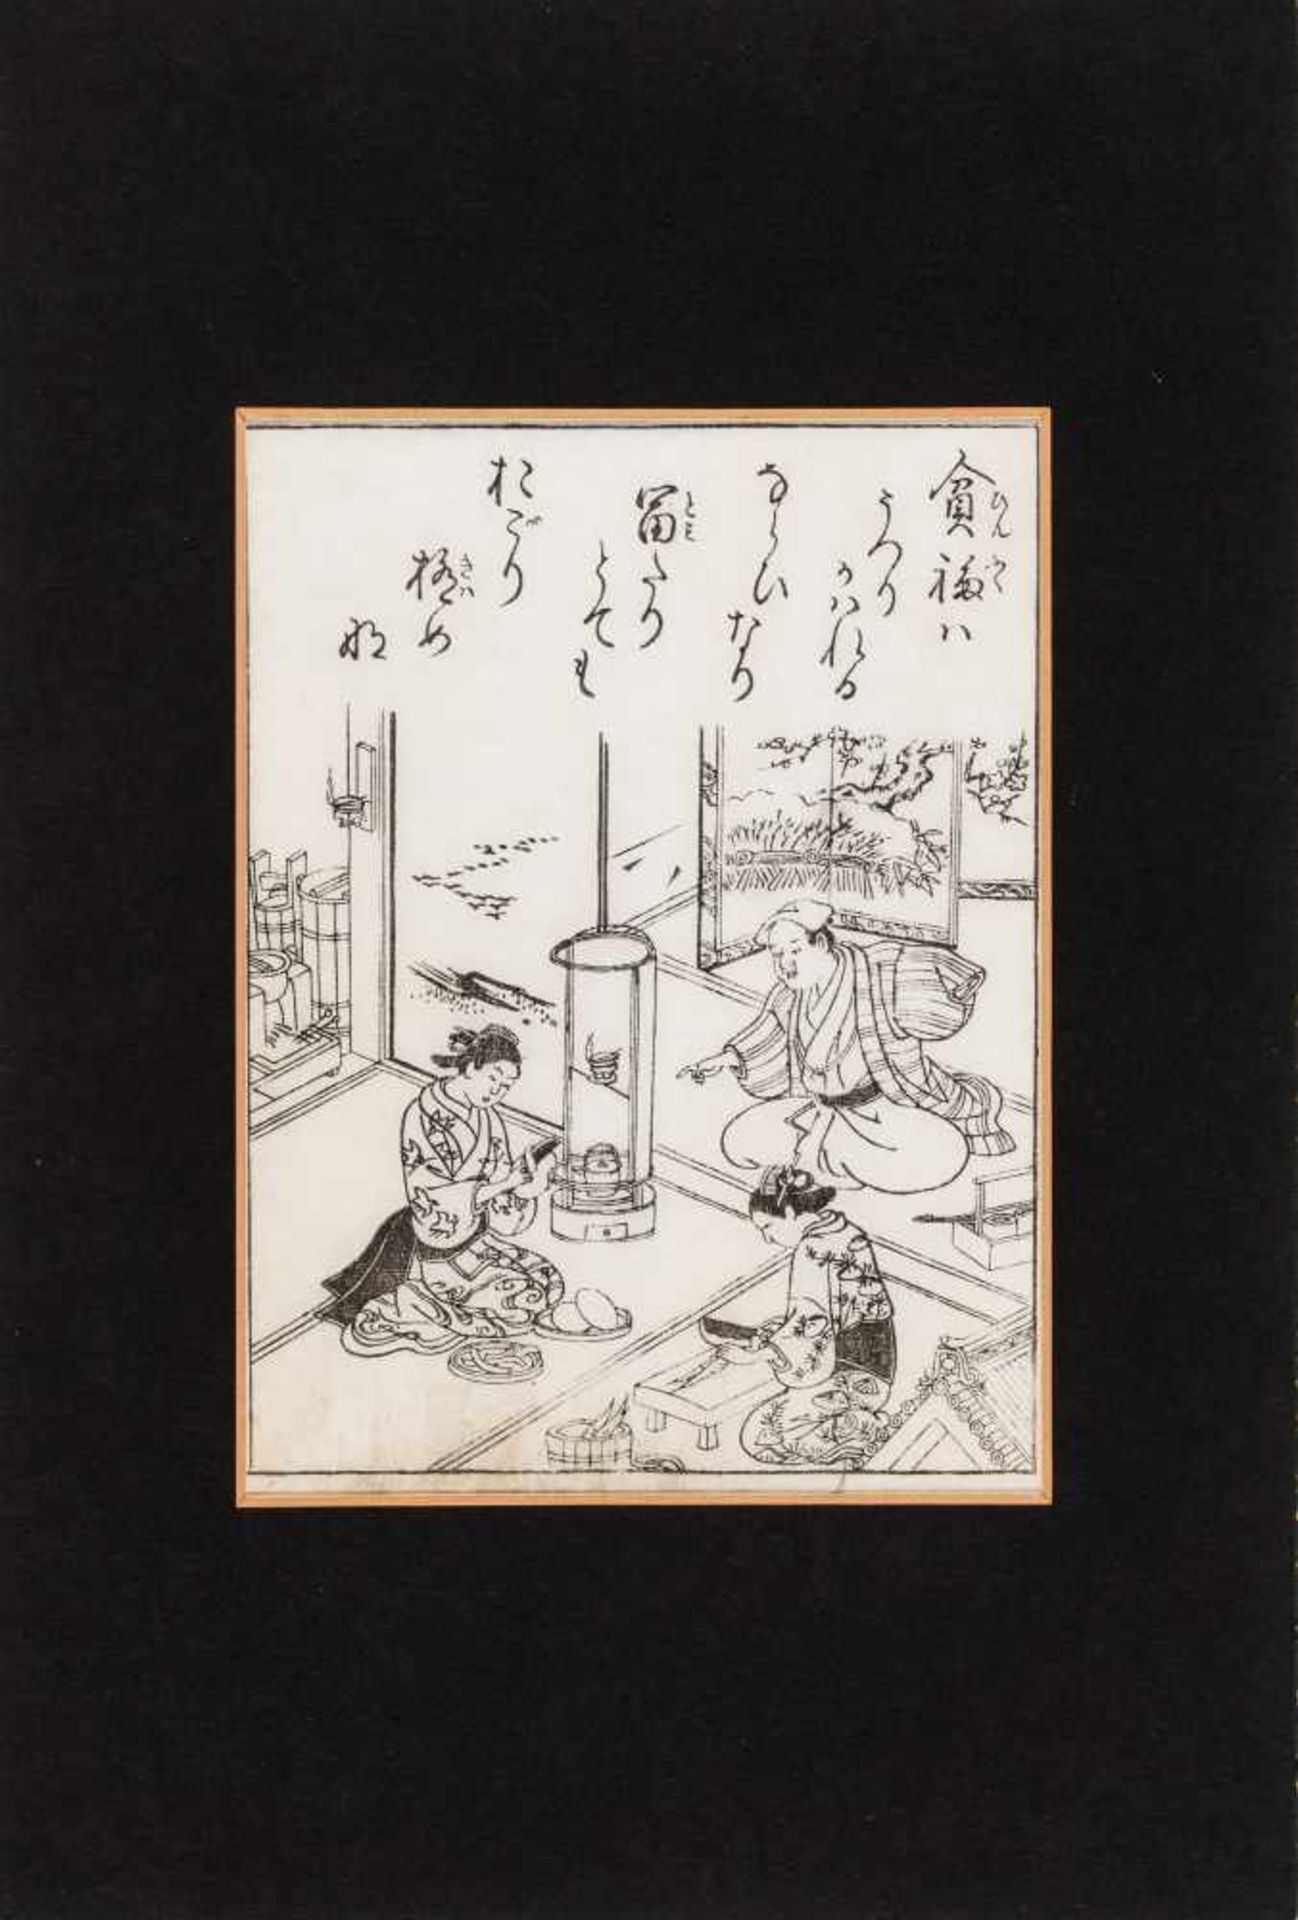 A GROUP OF EIGHT JAPANESE ORIGINAL WOODBLOCK PRINTS, 18TH CENTURYOriginal woodblock prints, - Image 3 of 9